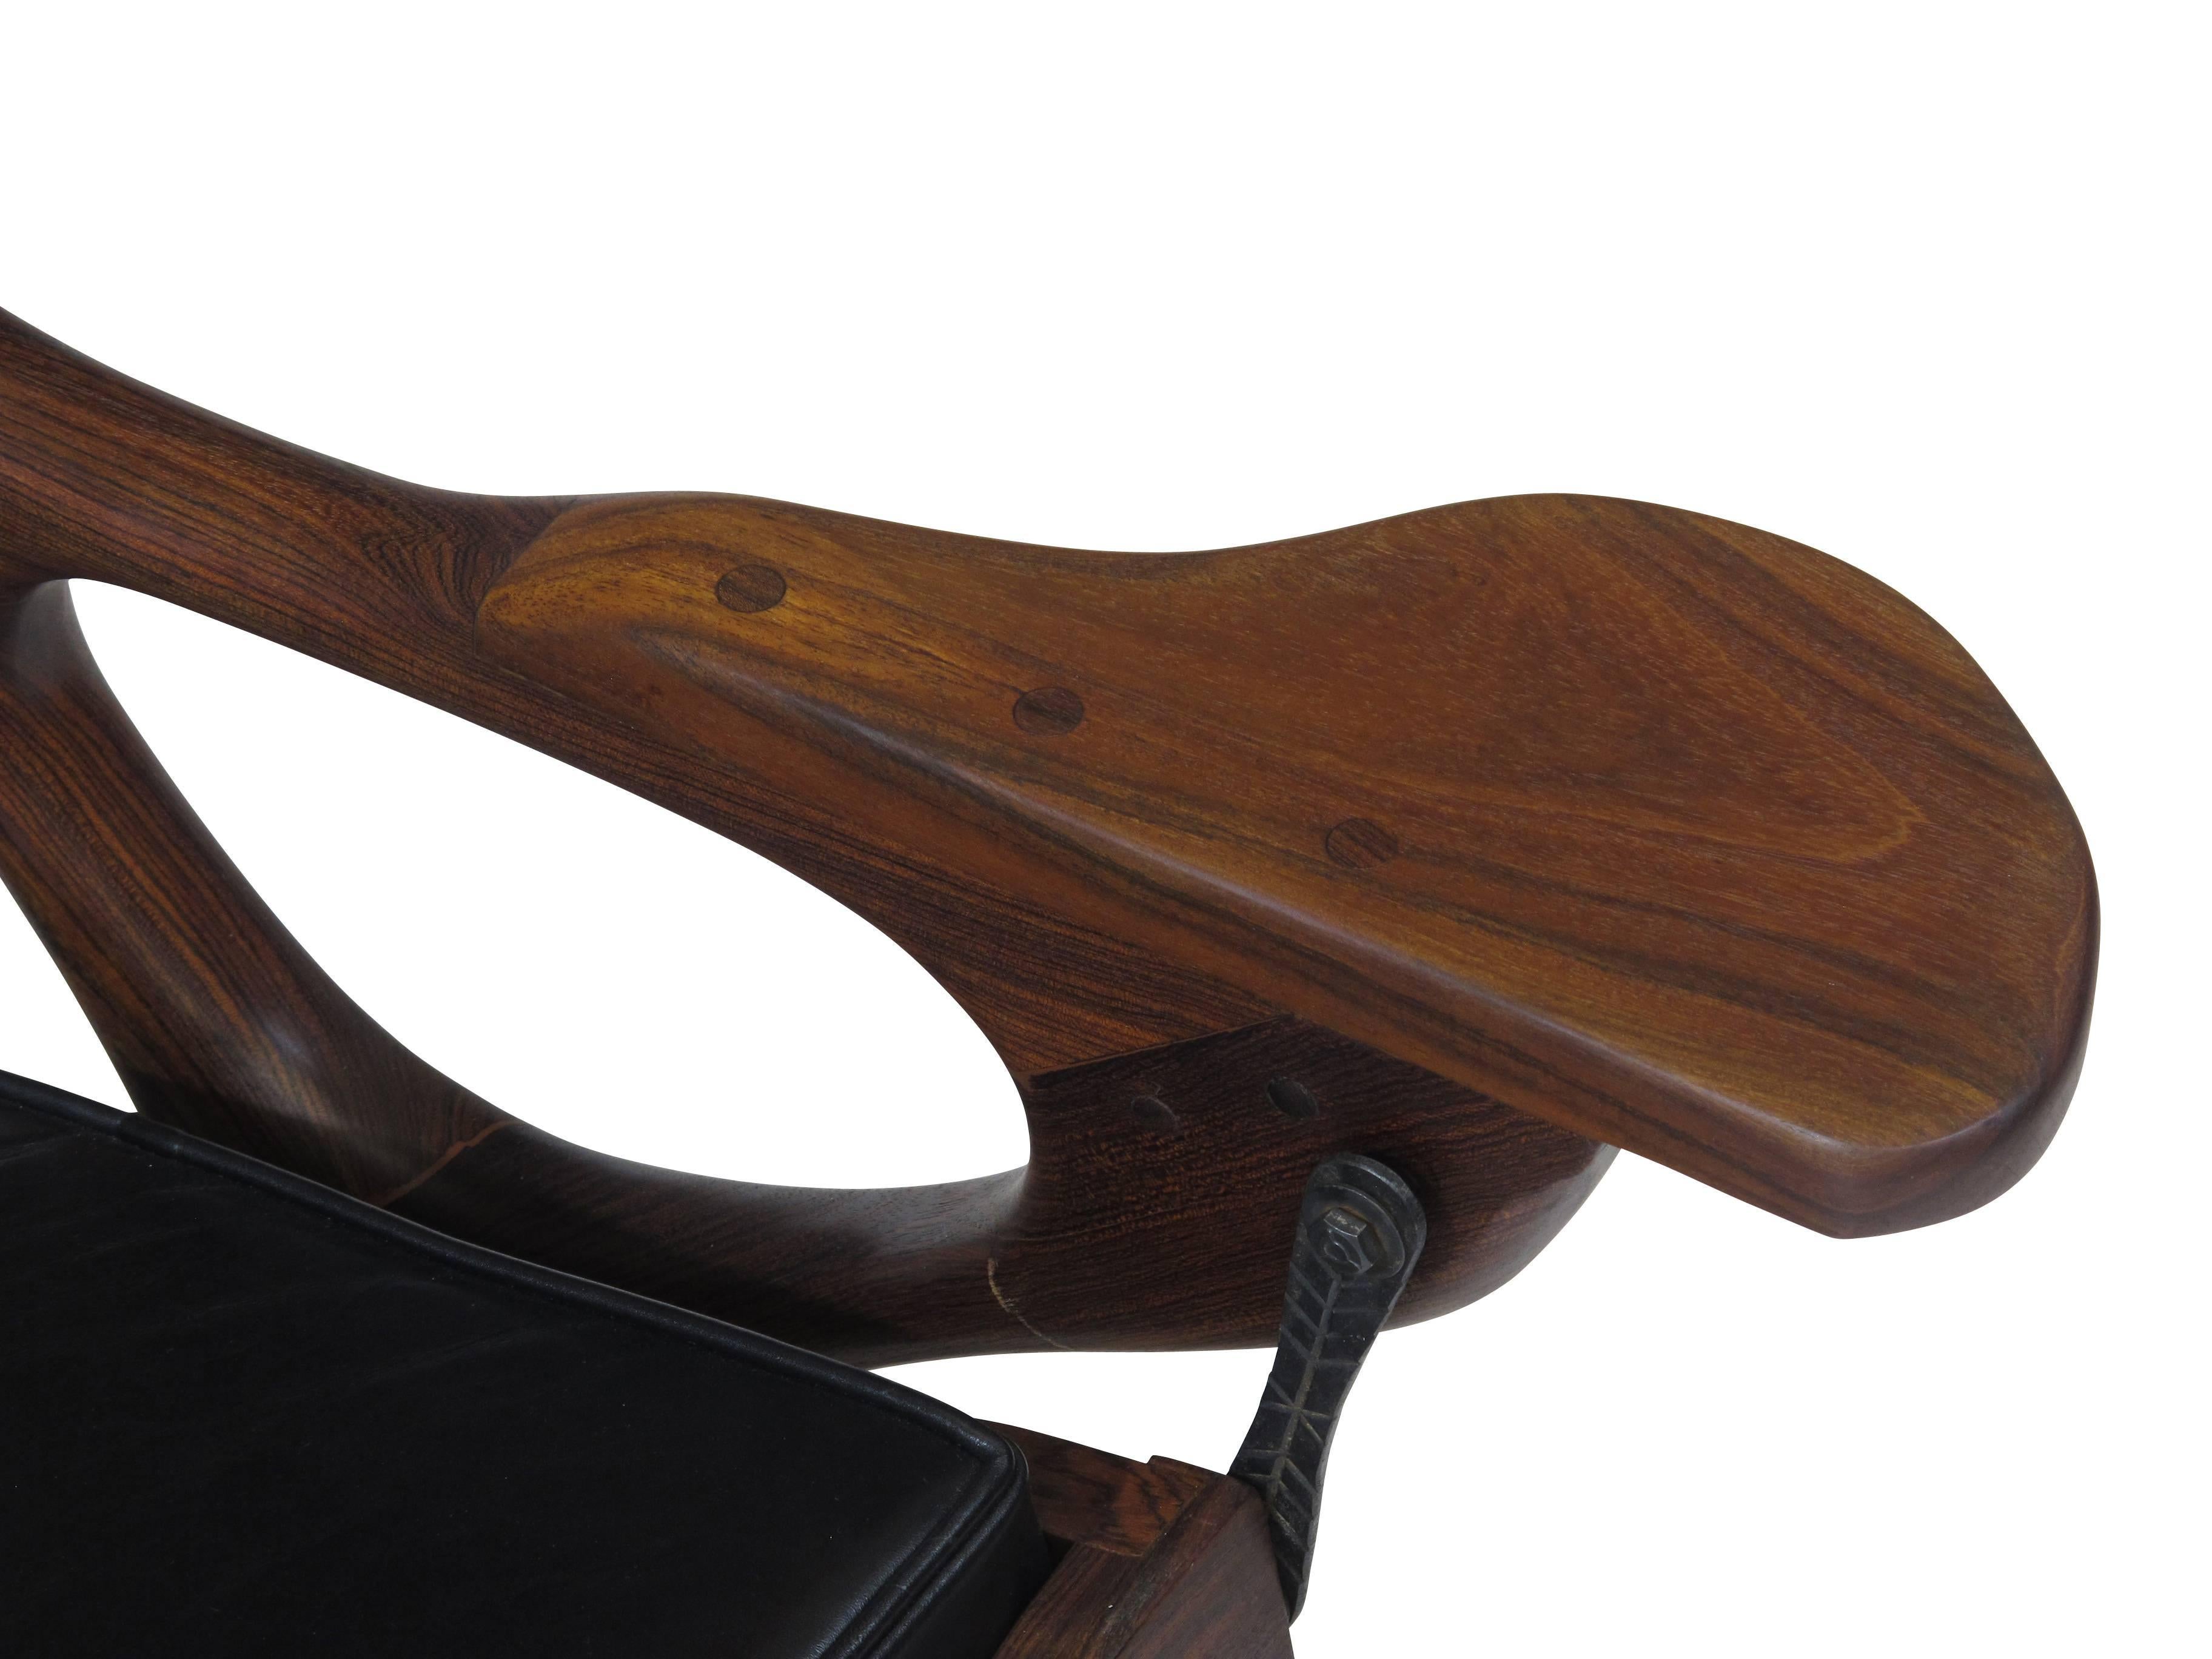 20th Century Don Shoemaker Cocobolo Rosewood Swinger Chair